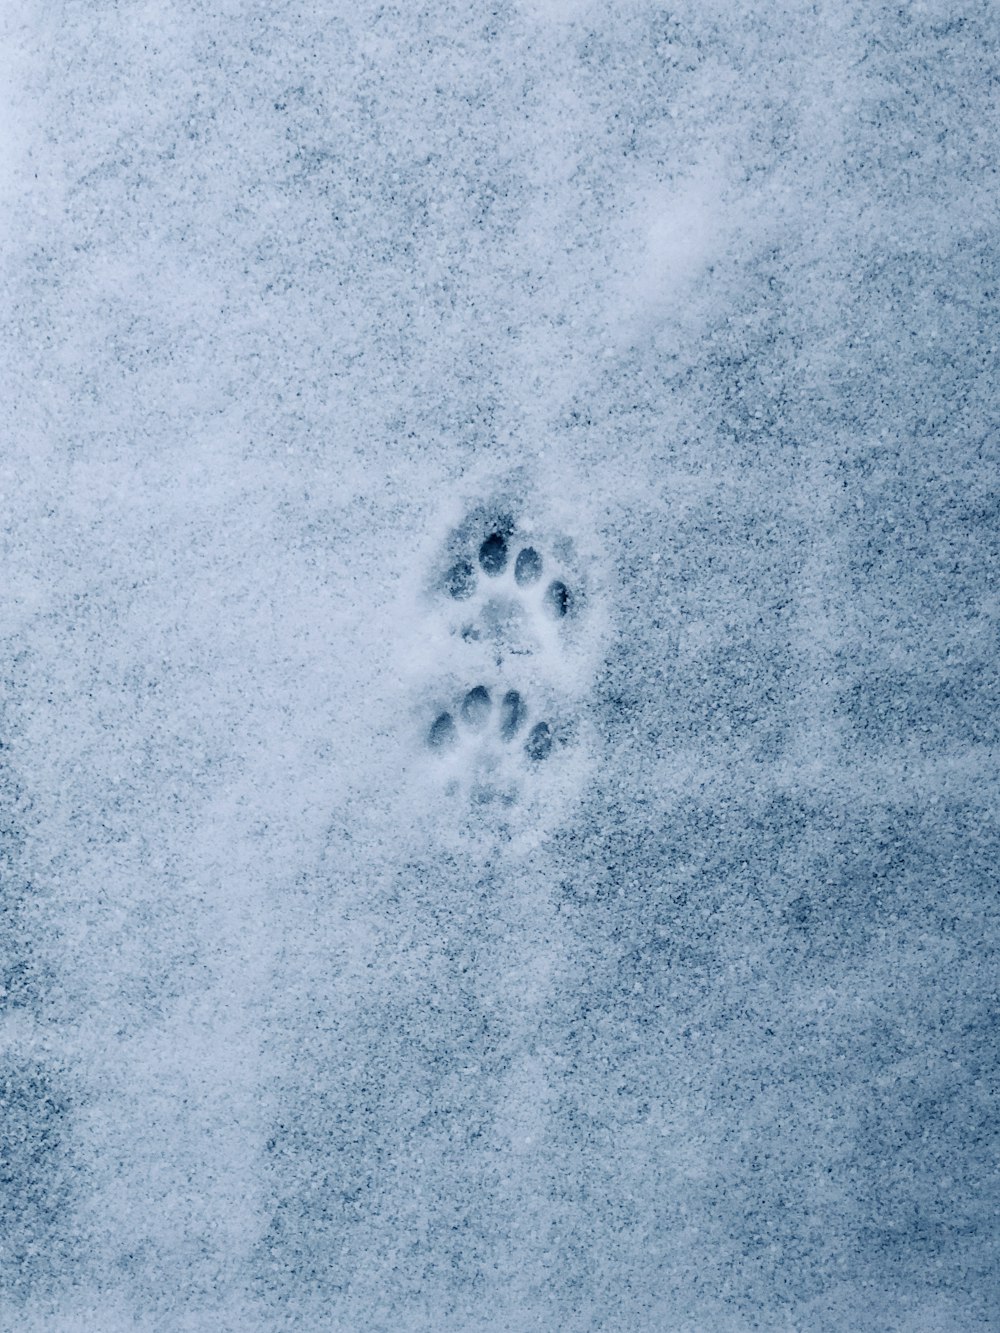 a dog's paw prints in the snow